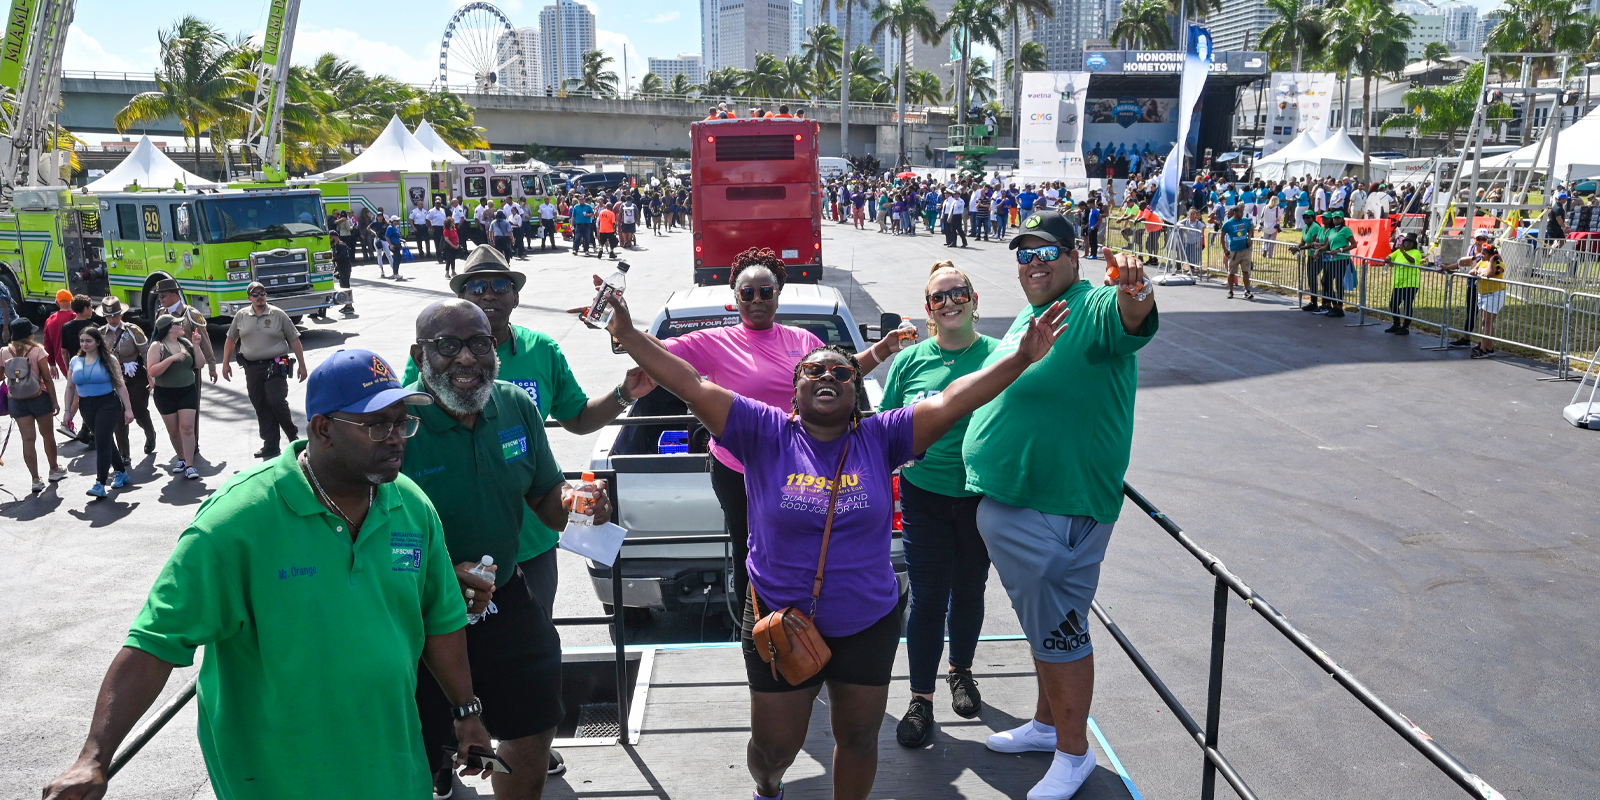 AFSCME members in the Miami area honored in Hometown Heroes Parade